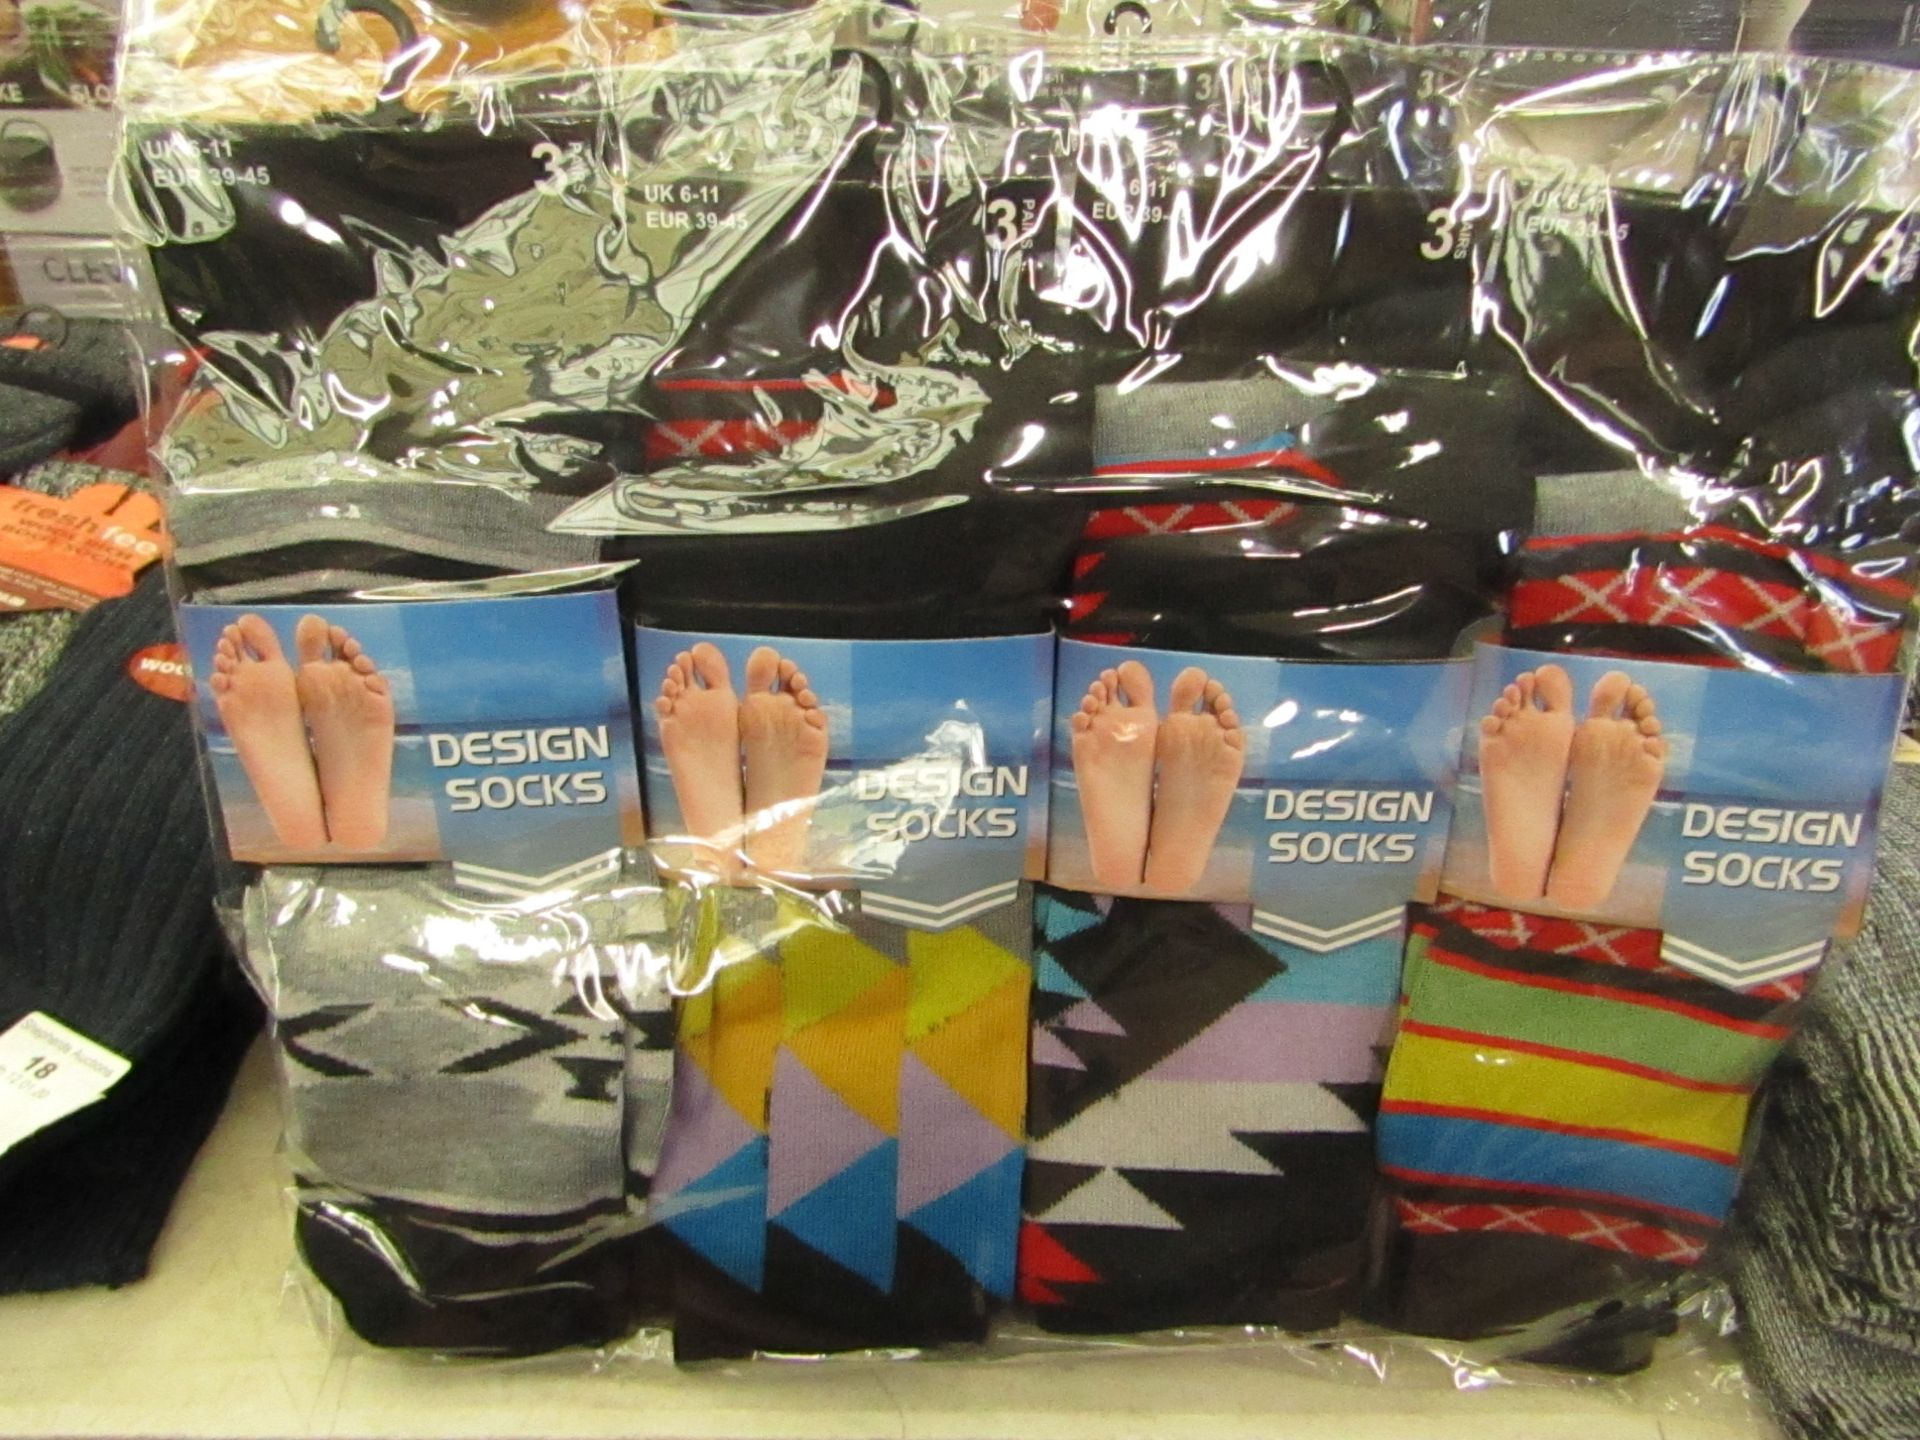 12 X Pairs of Mens Design socks size 6-11 new in packaging